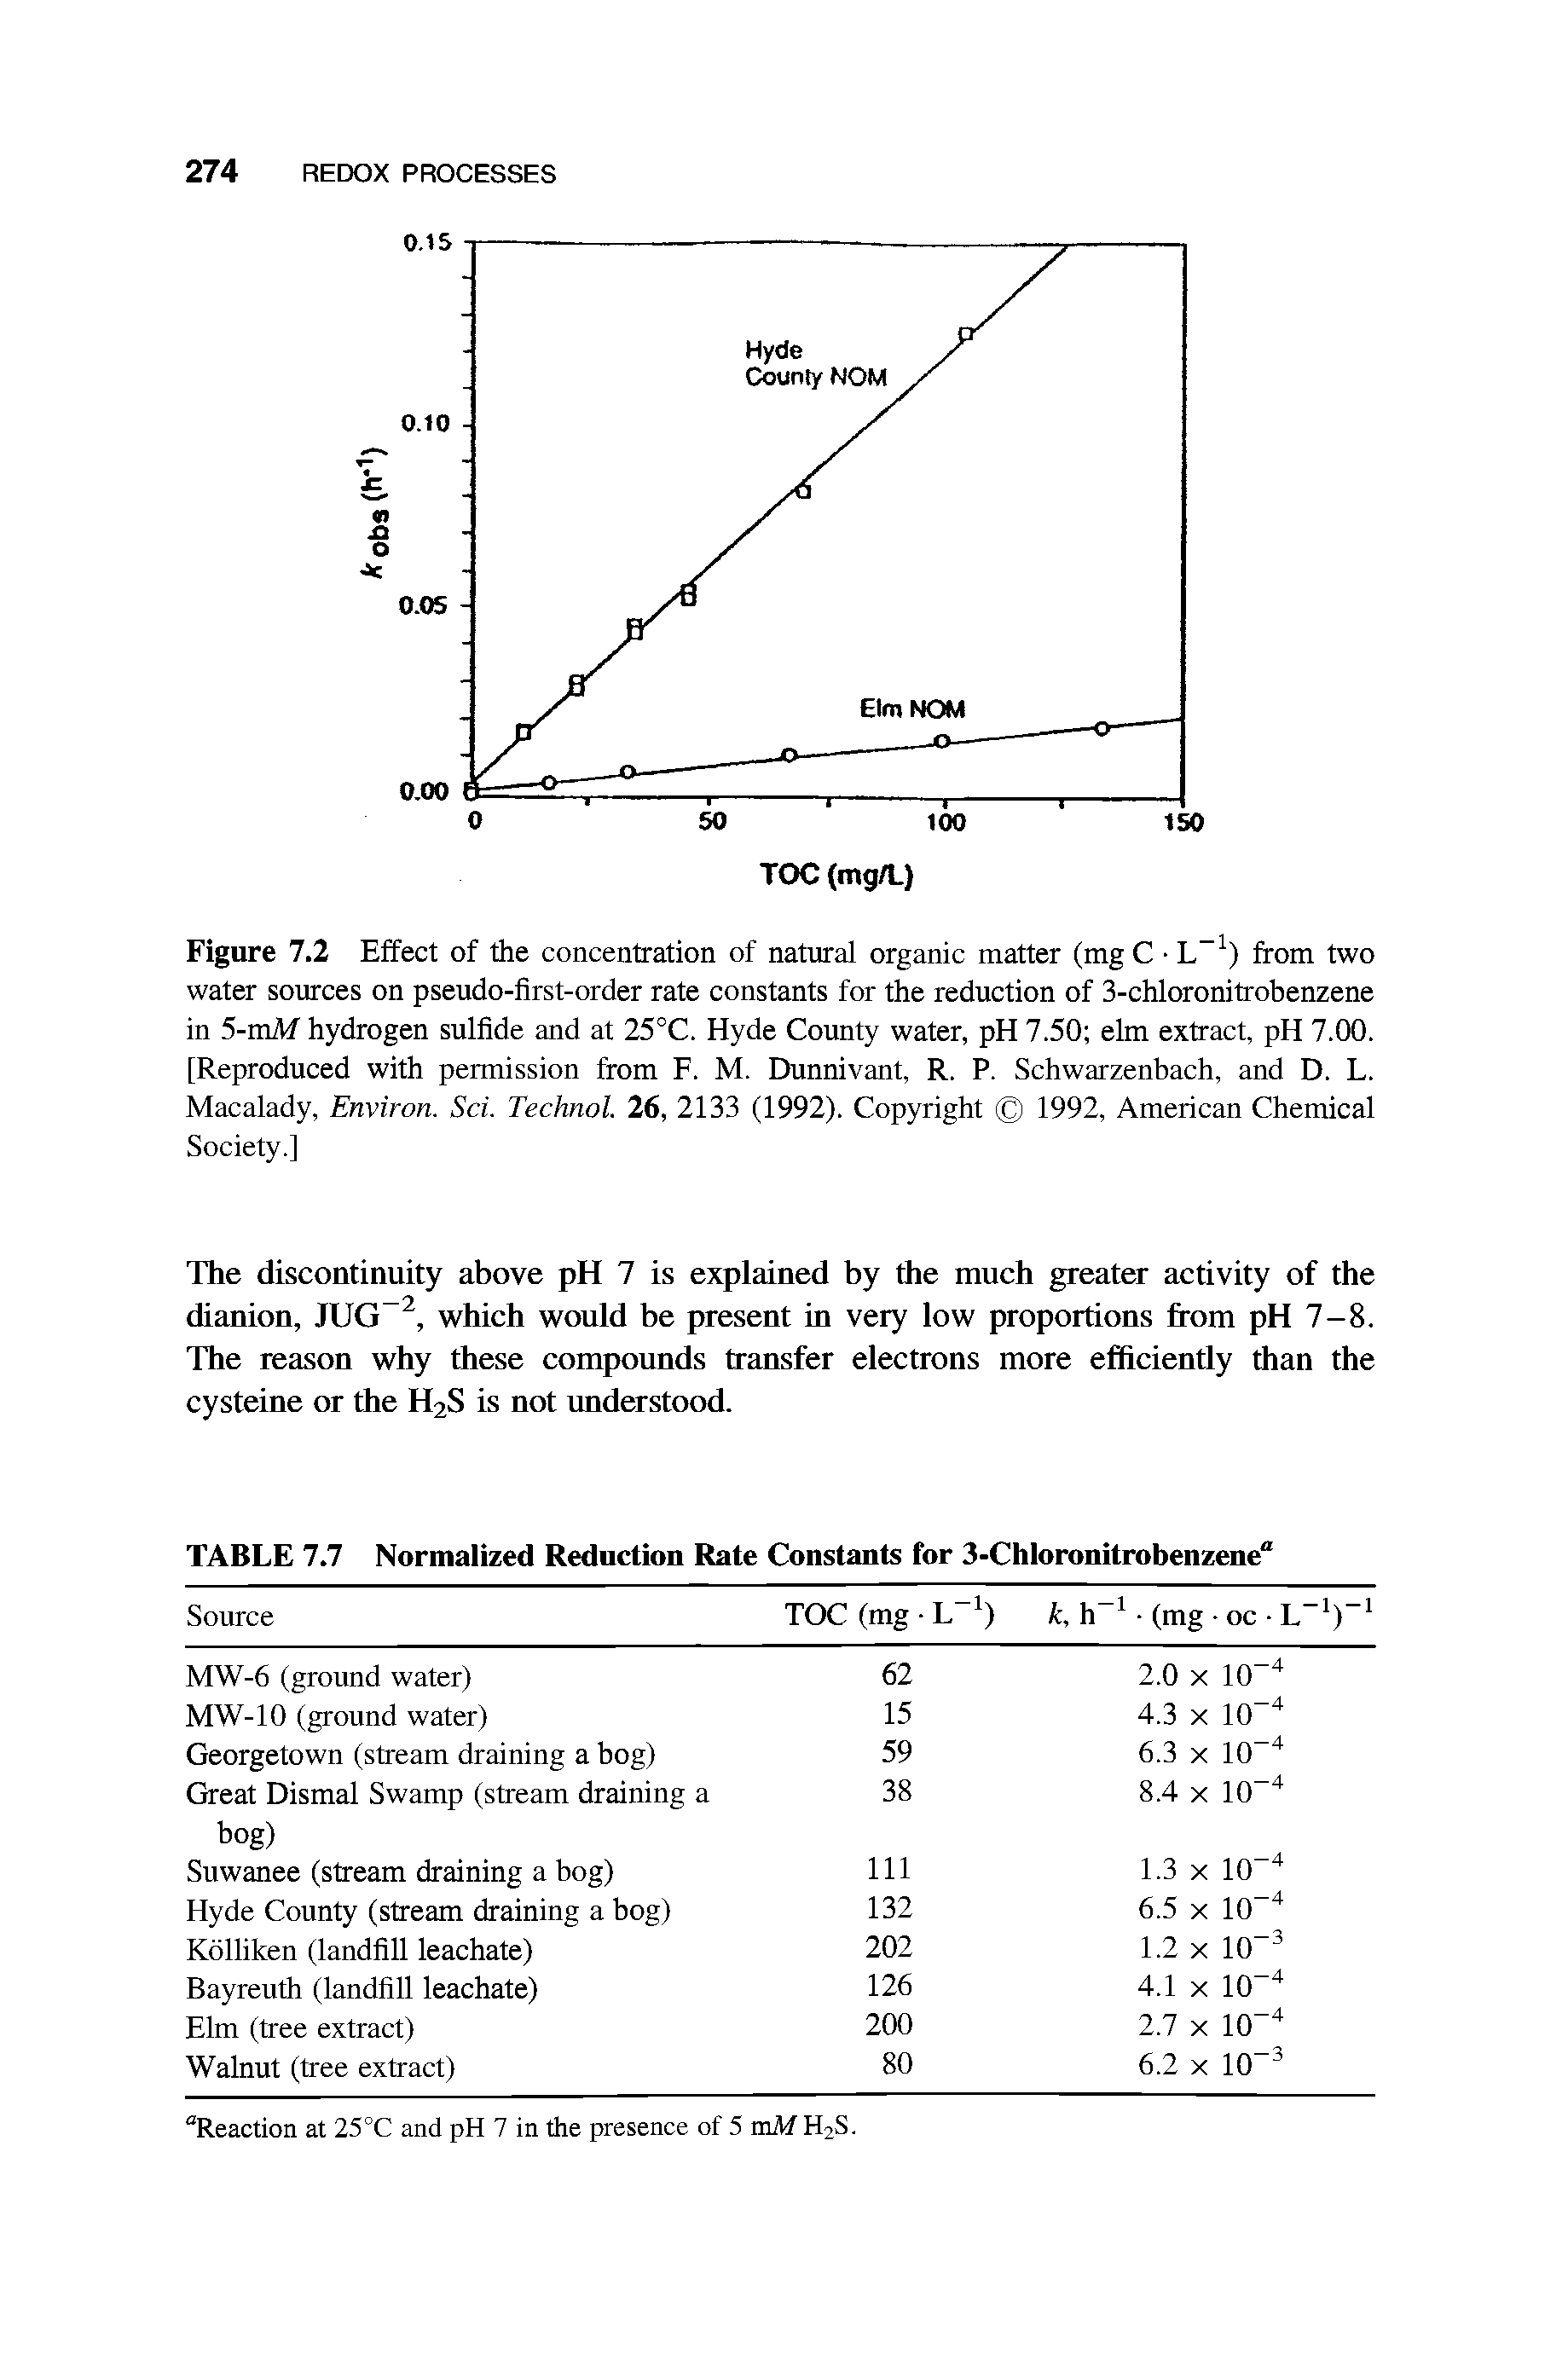 Figure 7.2 Effect of the concentration of natural organic matter (mg C L ) from two water sources on pseudo-first-order rate constants for the reduction of 3-chloronitrobenzene in 5-mM hydrogen sulfide and at 25°C. Hyde County water, pH 7.50 elm extract, pH 7.00. [Reproduced with permission from F. M. Dunnivant, R. P. Schwarzenbach, and D. L. Macalady, Environ. Sci. Technol. 26, 2133 (1992). Copyright 1992, American Chemical Society.]...